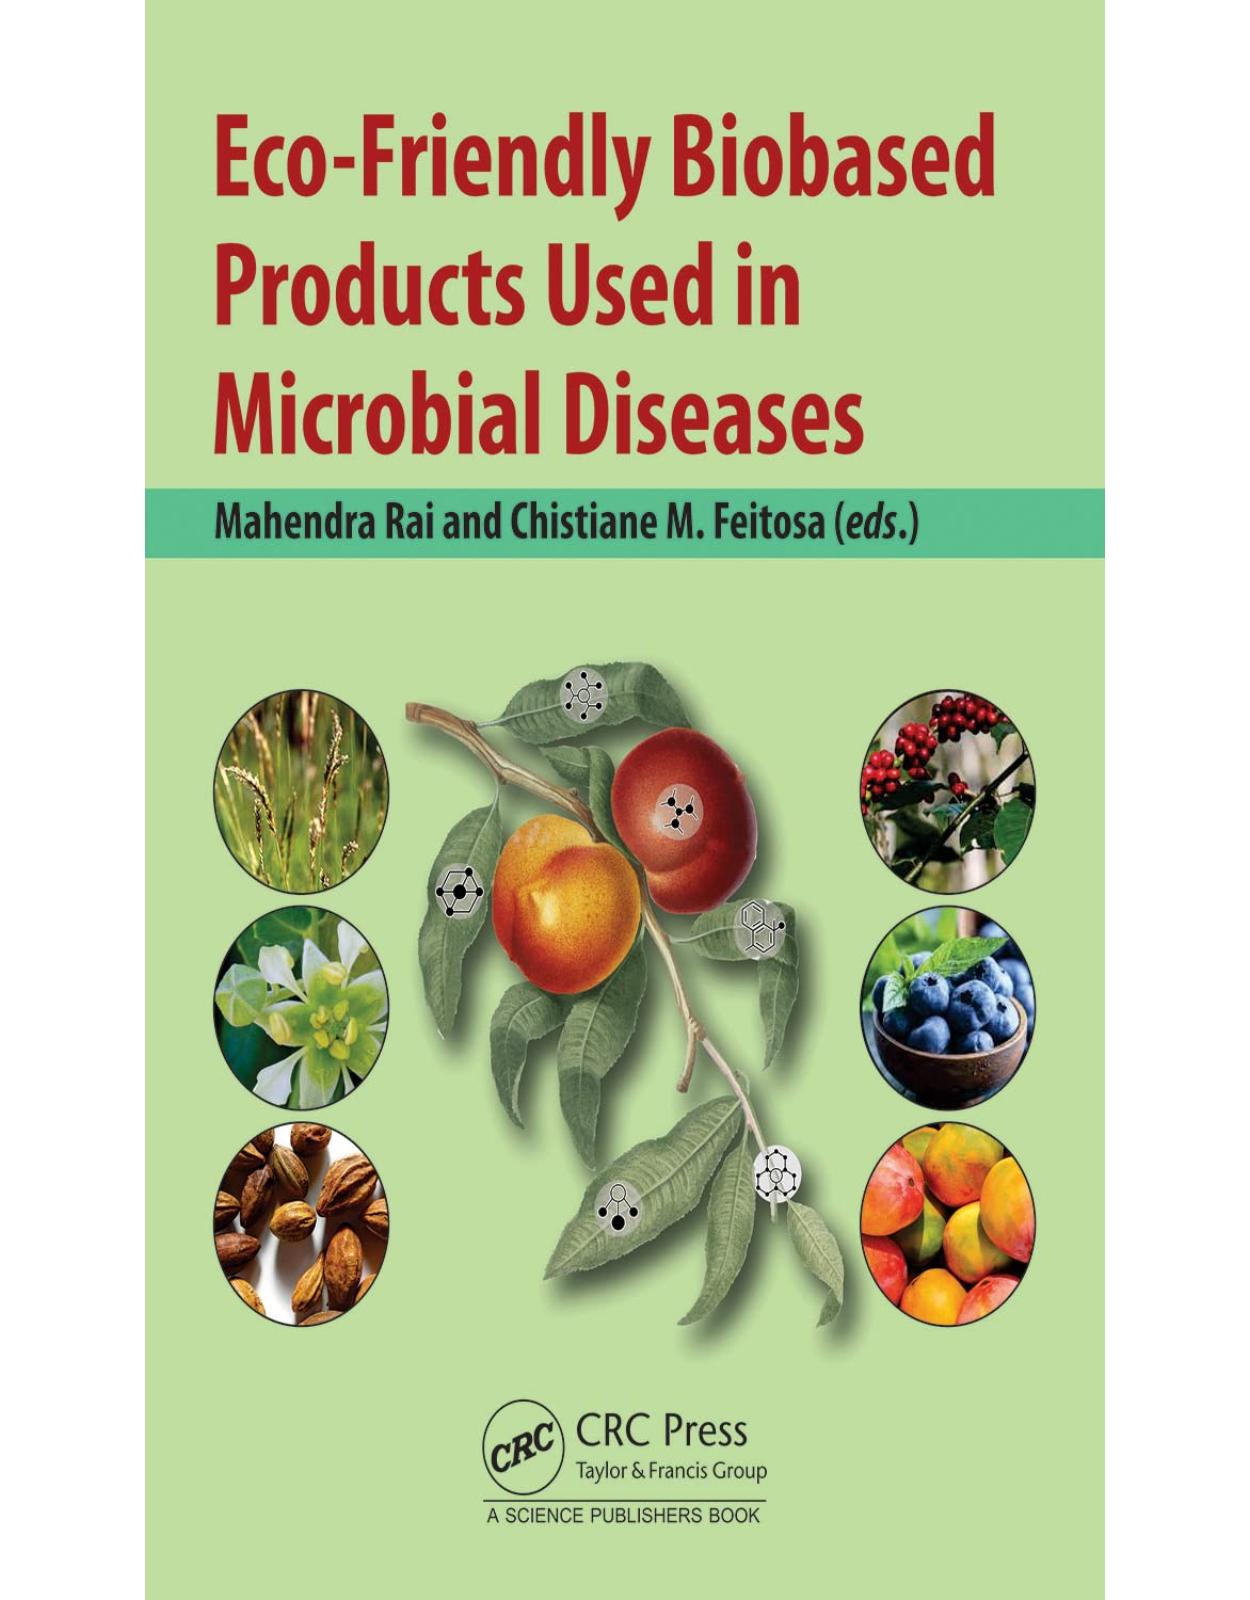 Eco-Friendly Biobased Products Used in Microbial Diseases